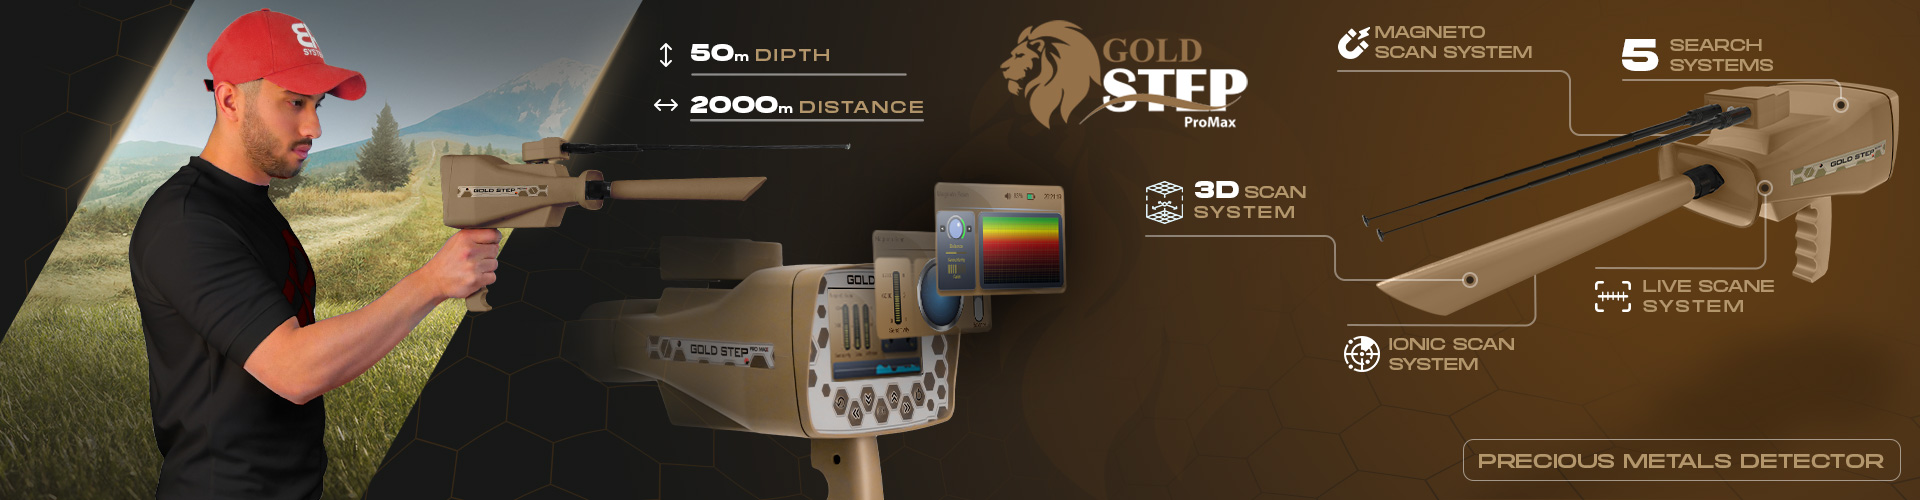 BR Gold Step Pro Max - Metal and gold Detector